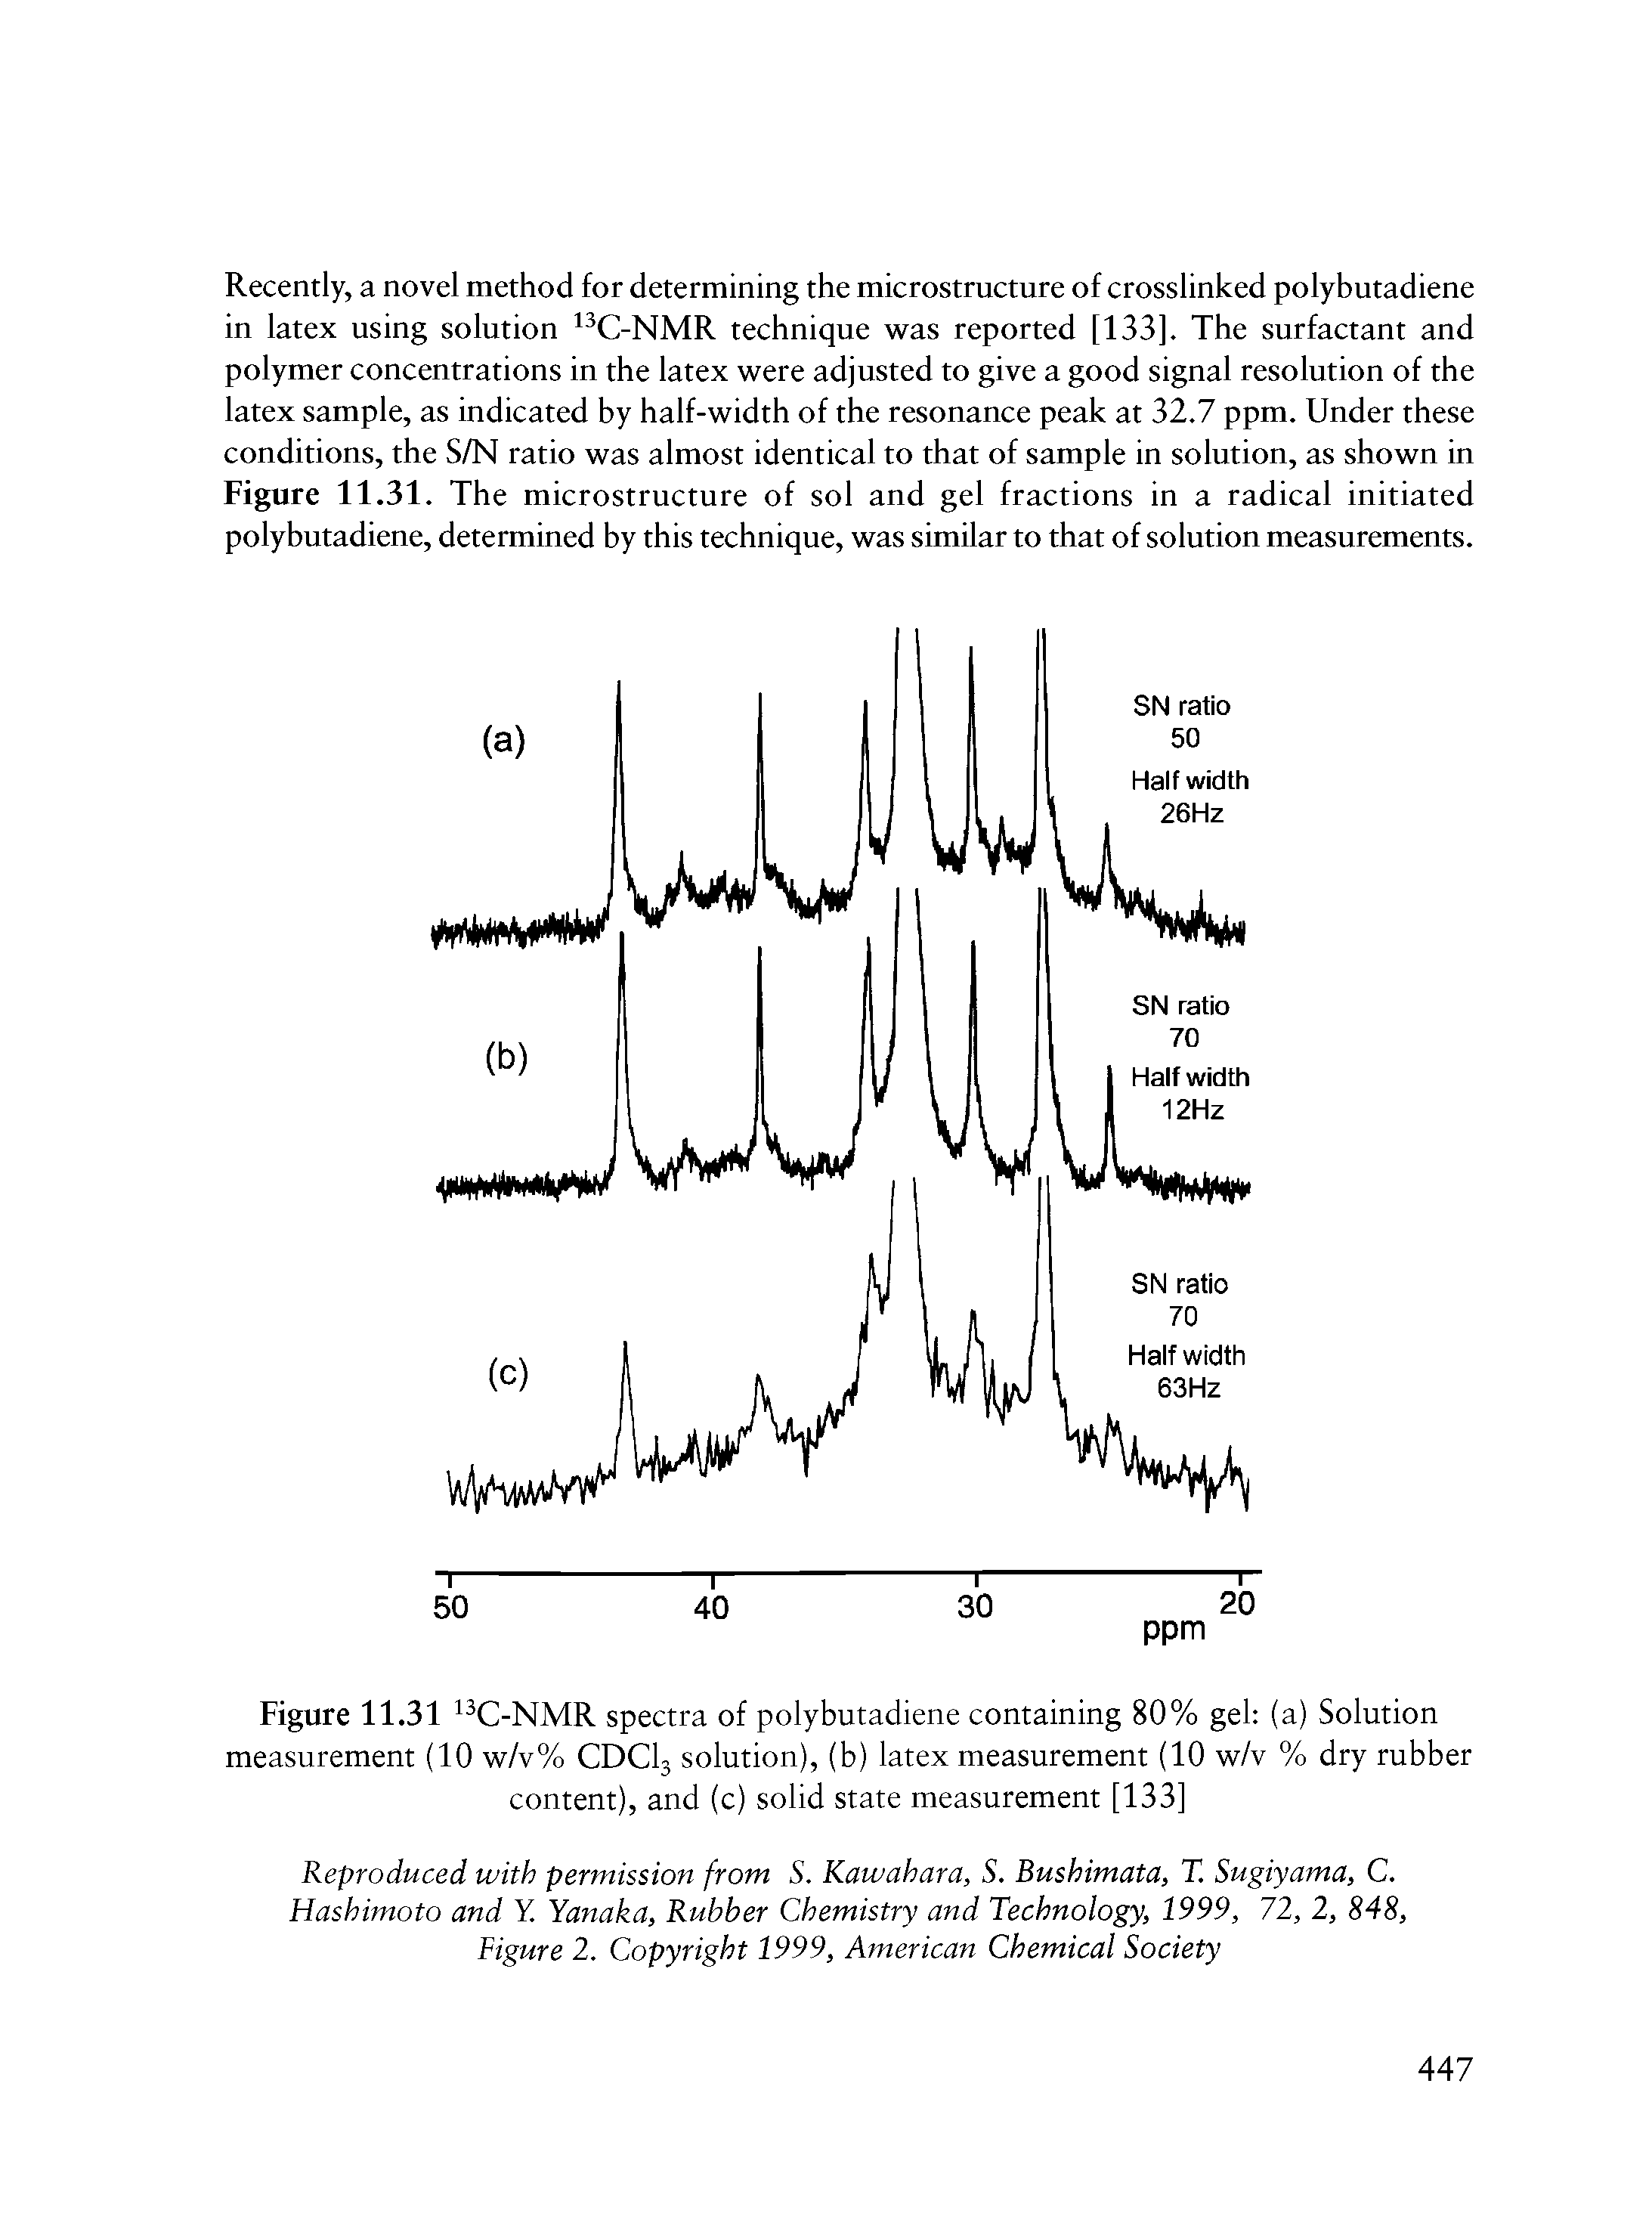 Figure 11.31 13C-NMR spectra of polybutadiene containing 80% gel (a) Solution measurement (10 w/v% CDC13 solution), (b) latex measurement (10 w/v % dry rubber content), and (c) solid state measurement [133]...